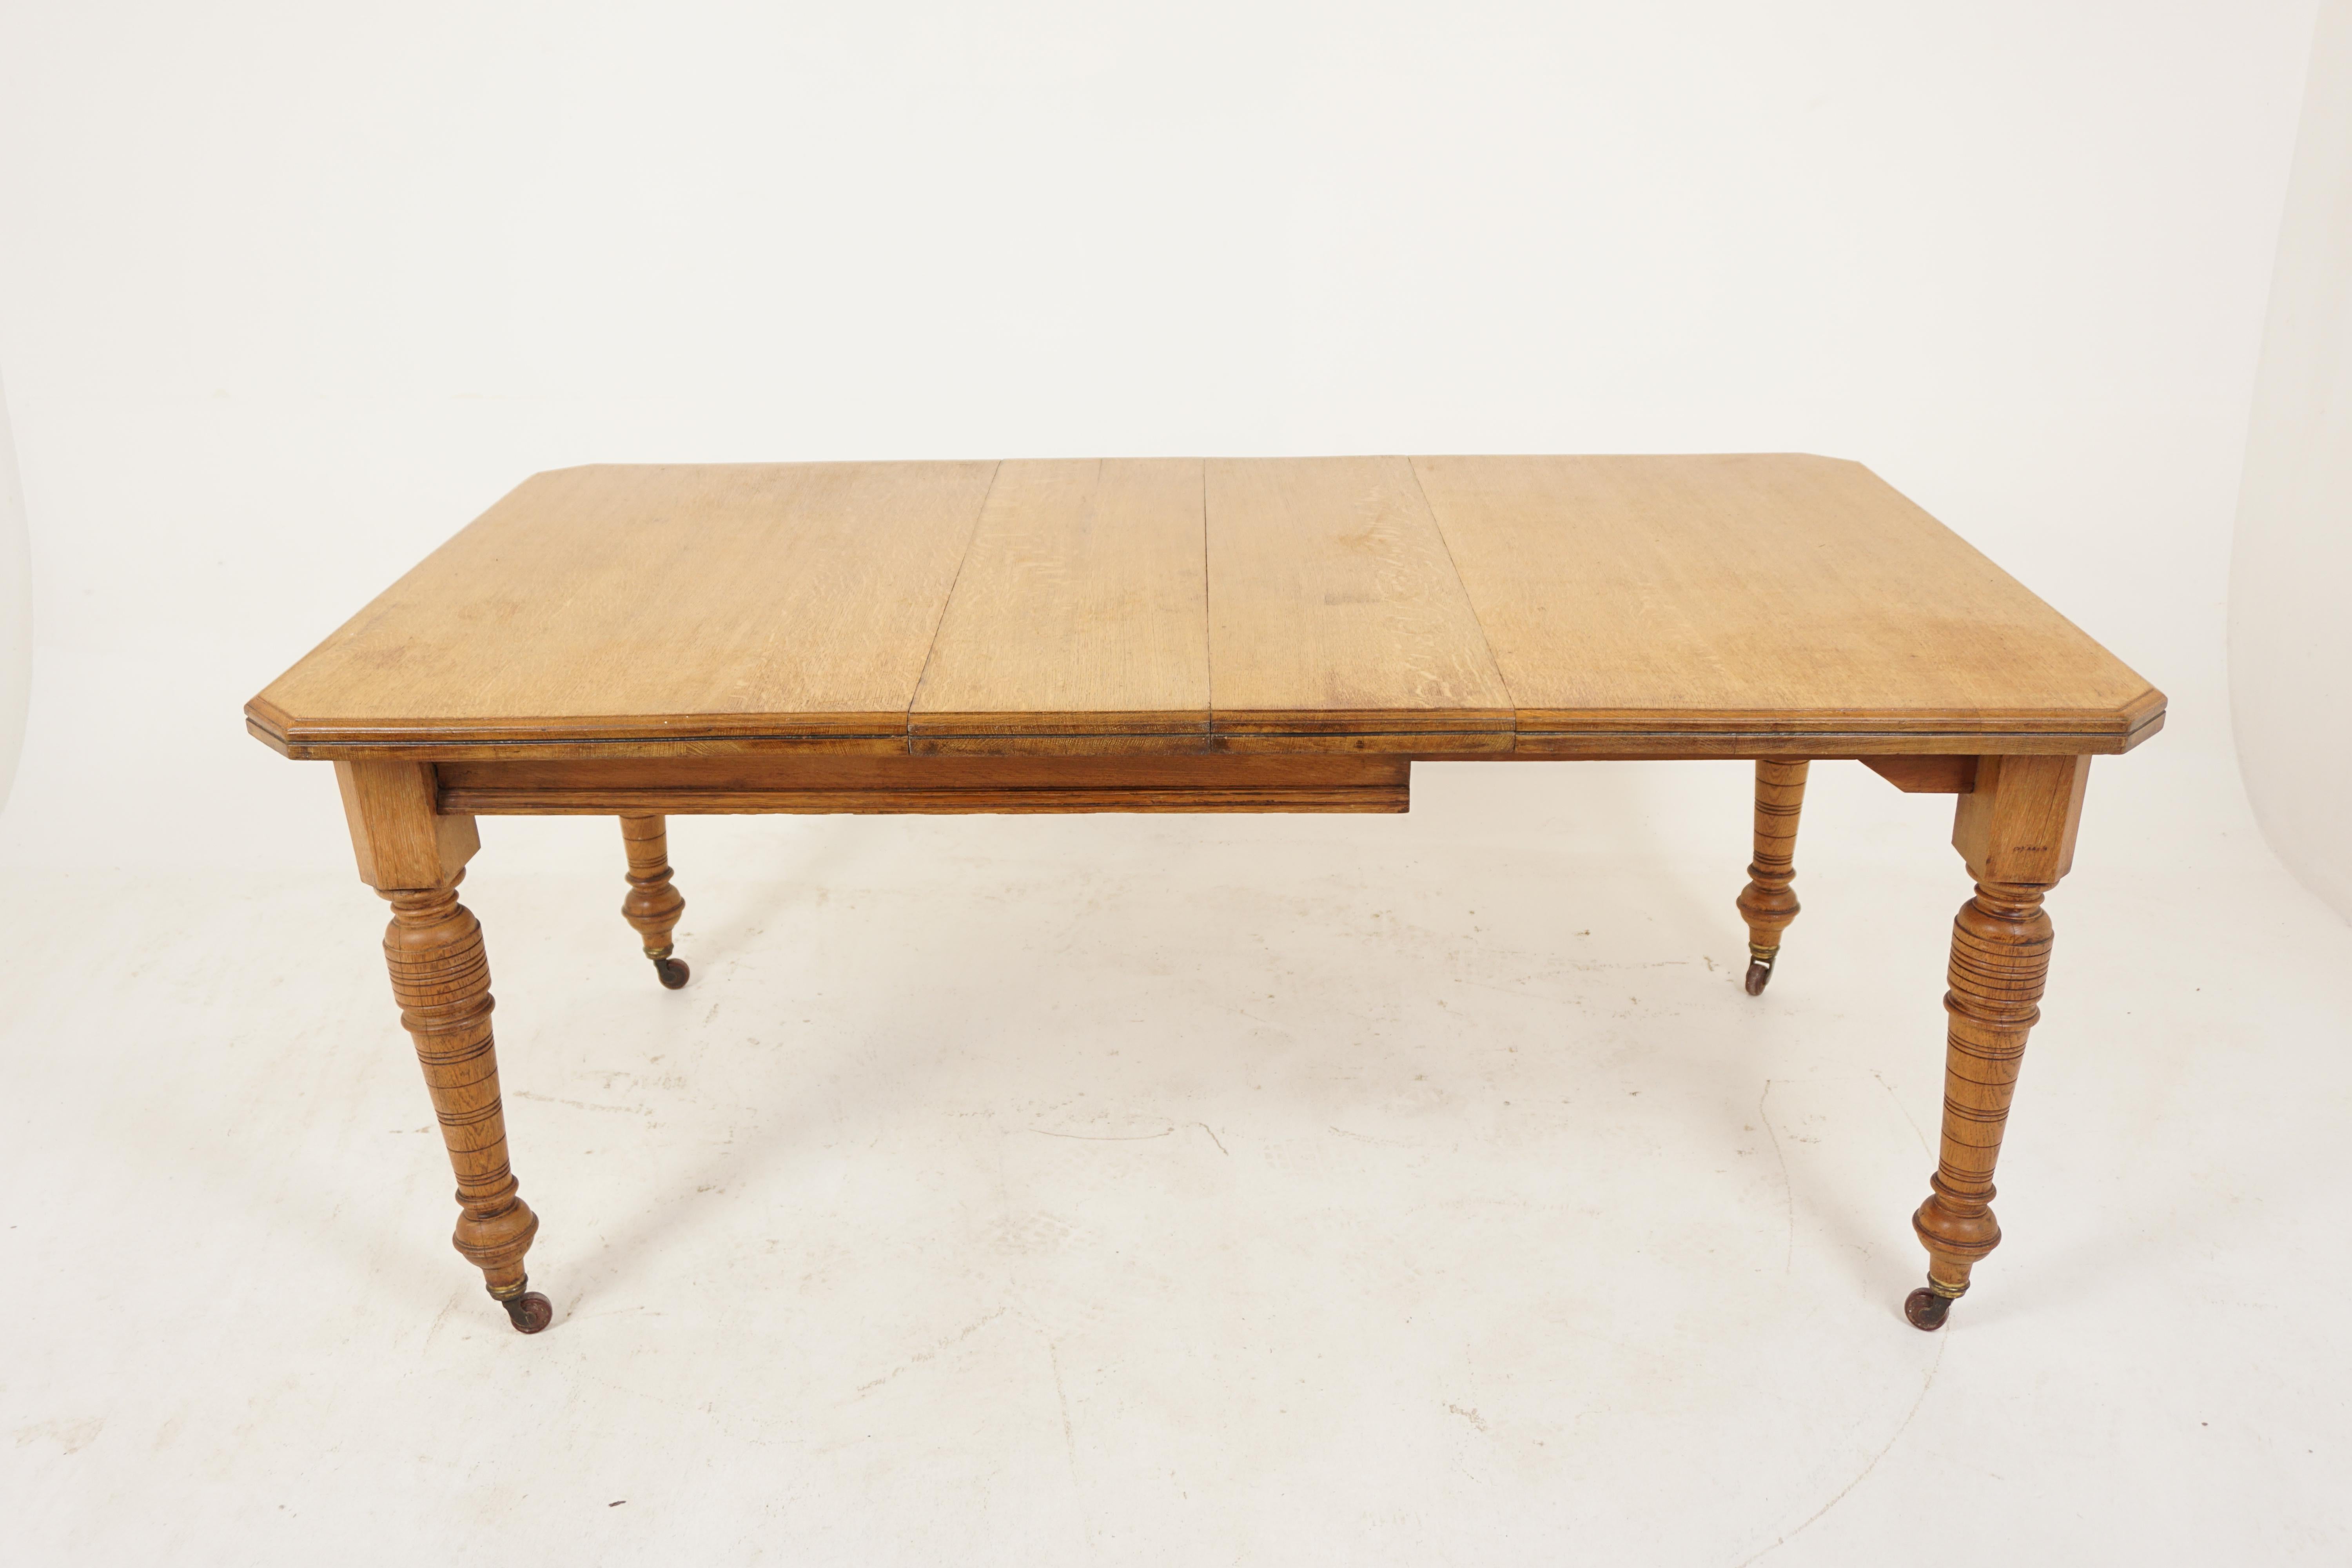 Hand-Crafted Antique Victorian Oak Dining Table With 2 Leaves, Scotland 1880, B2587